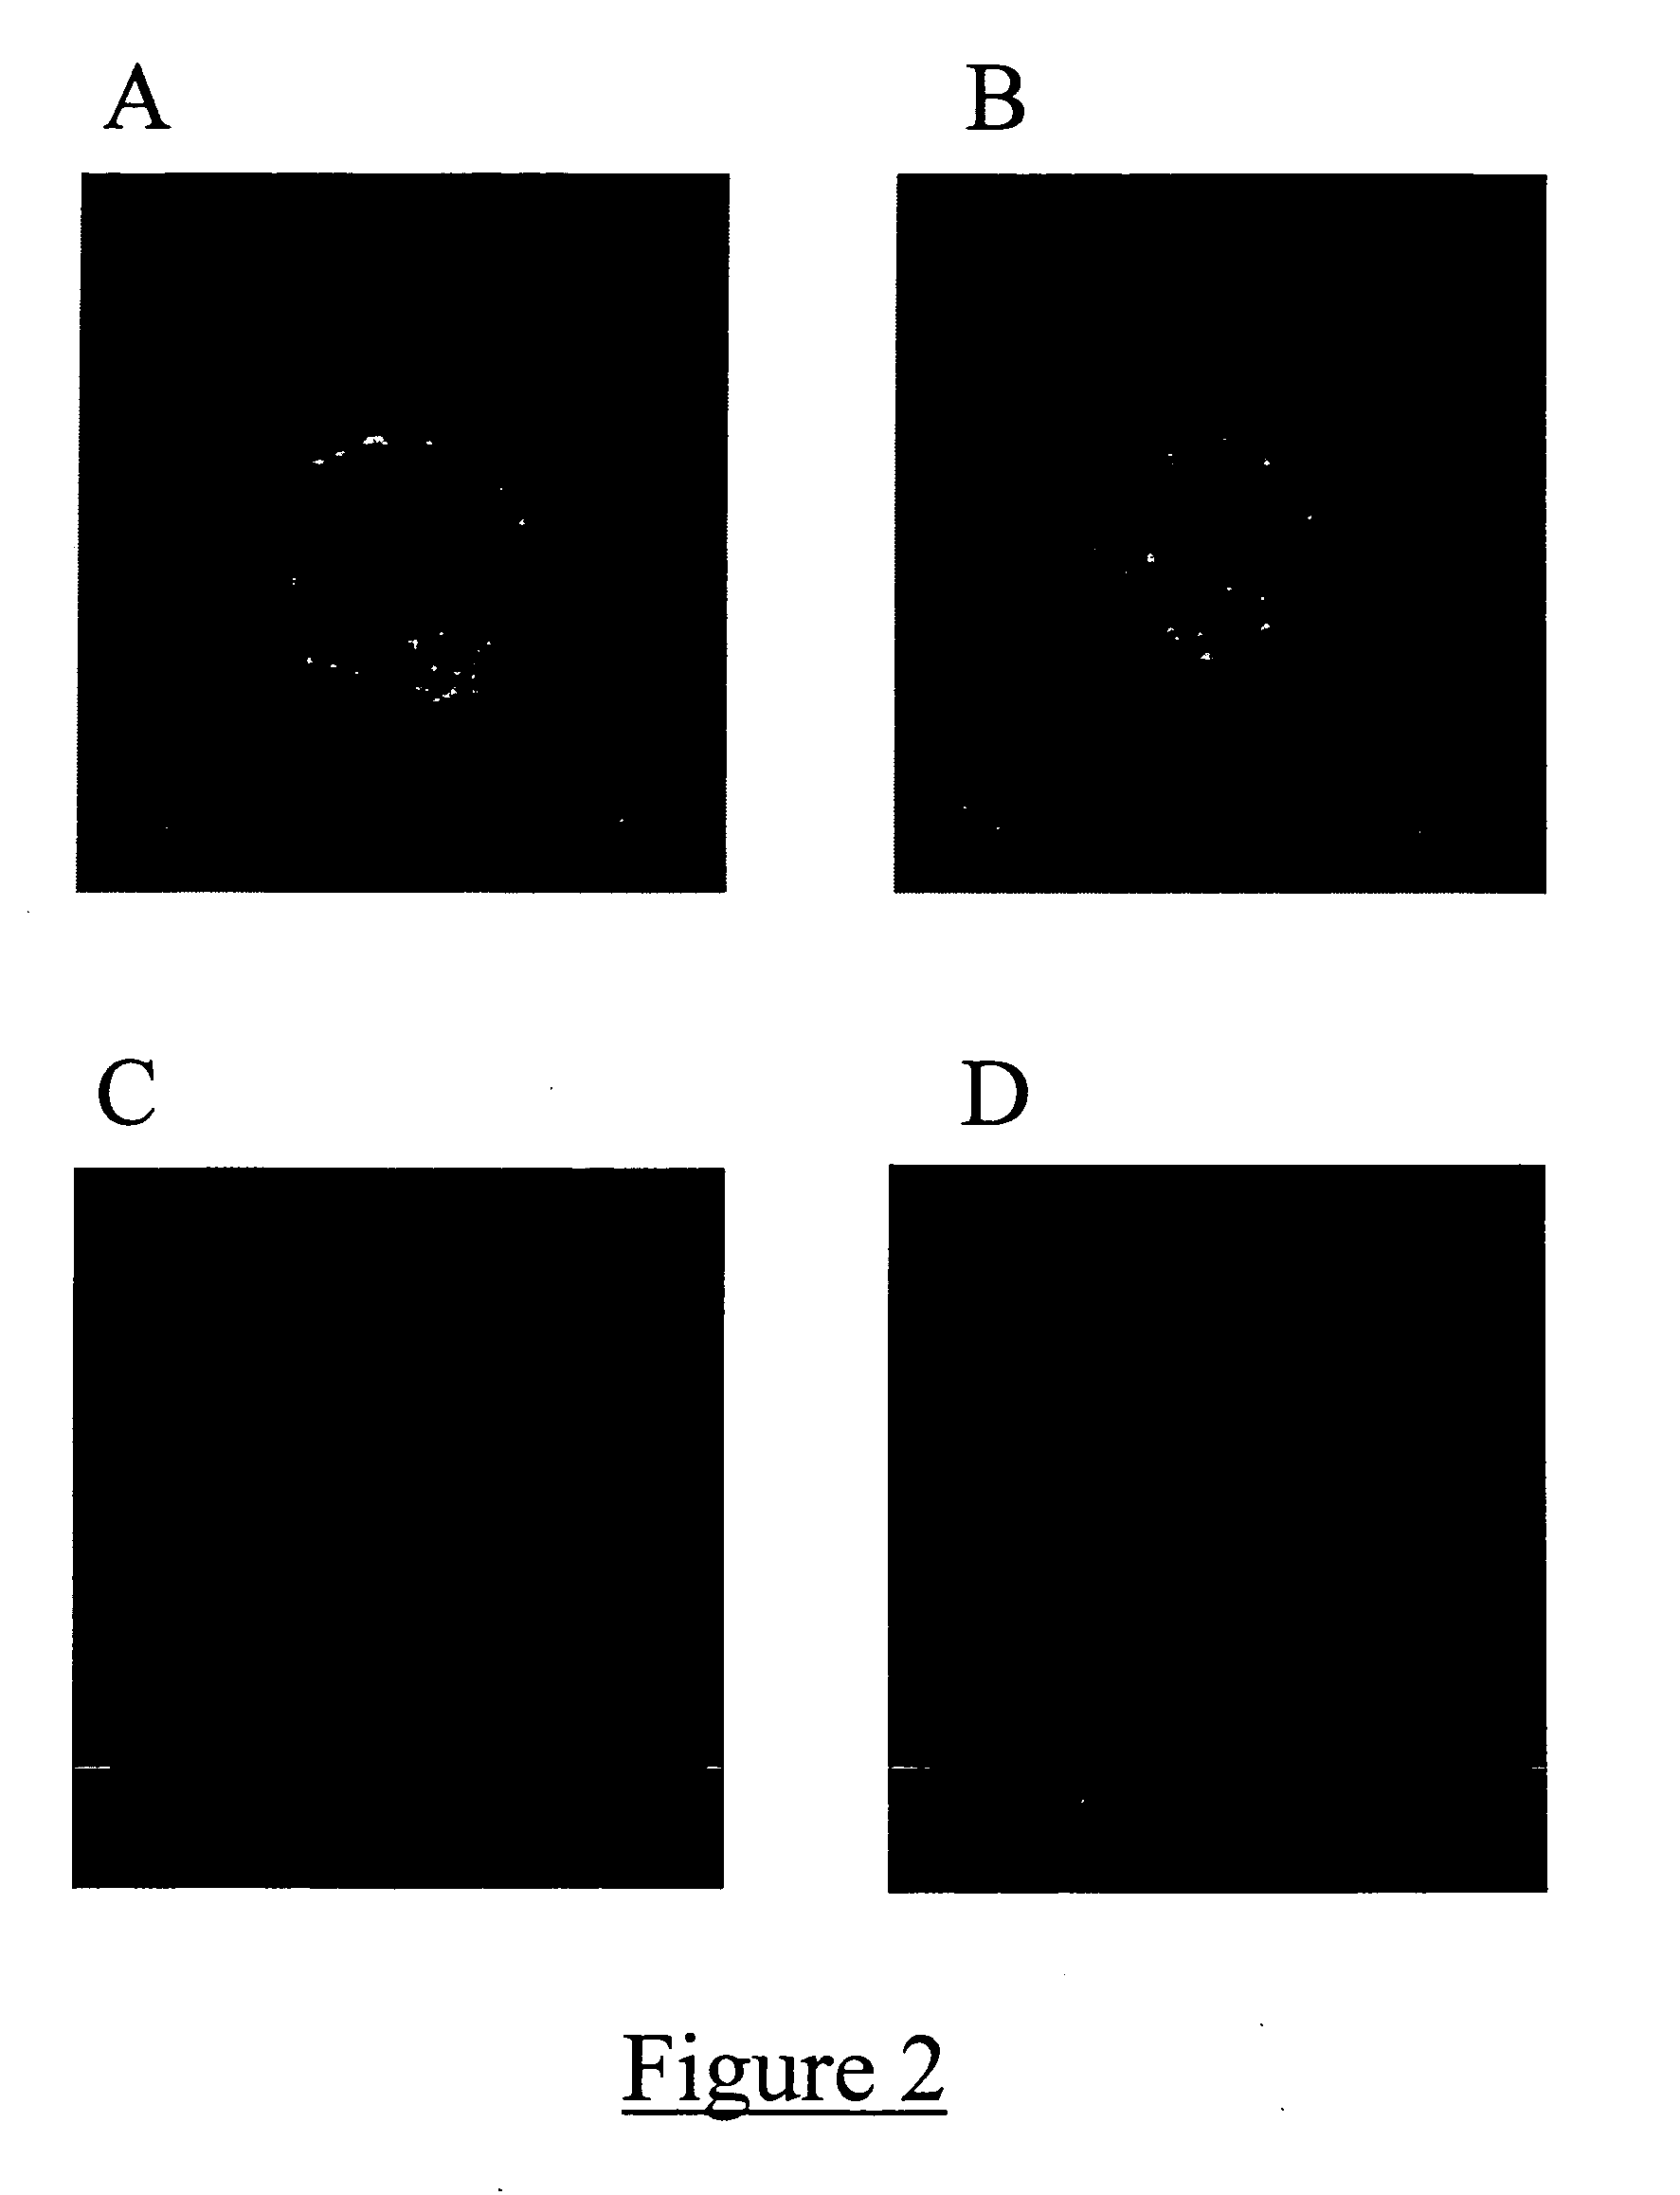 Method for treating a condition with neural progenitor cells derived from whole bone marrow